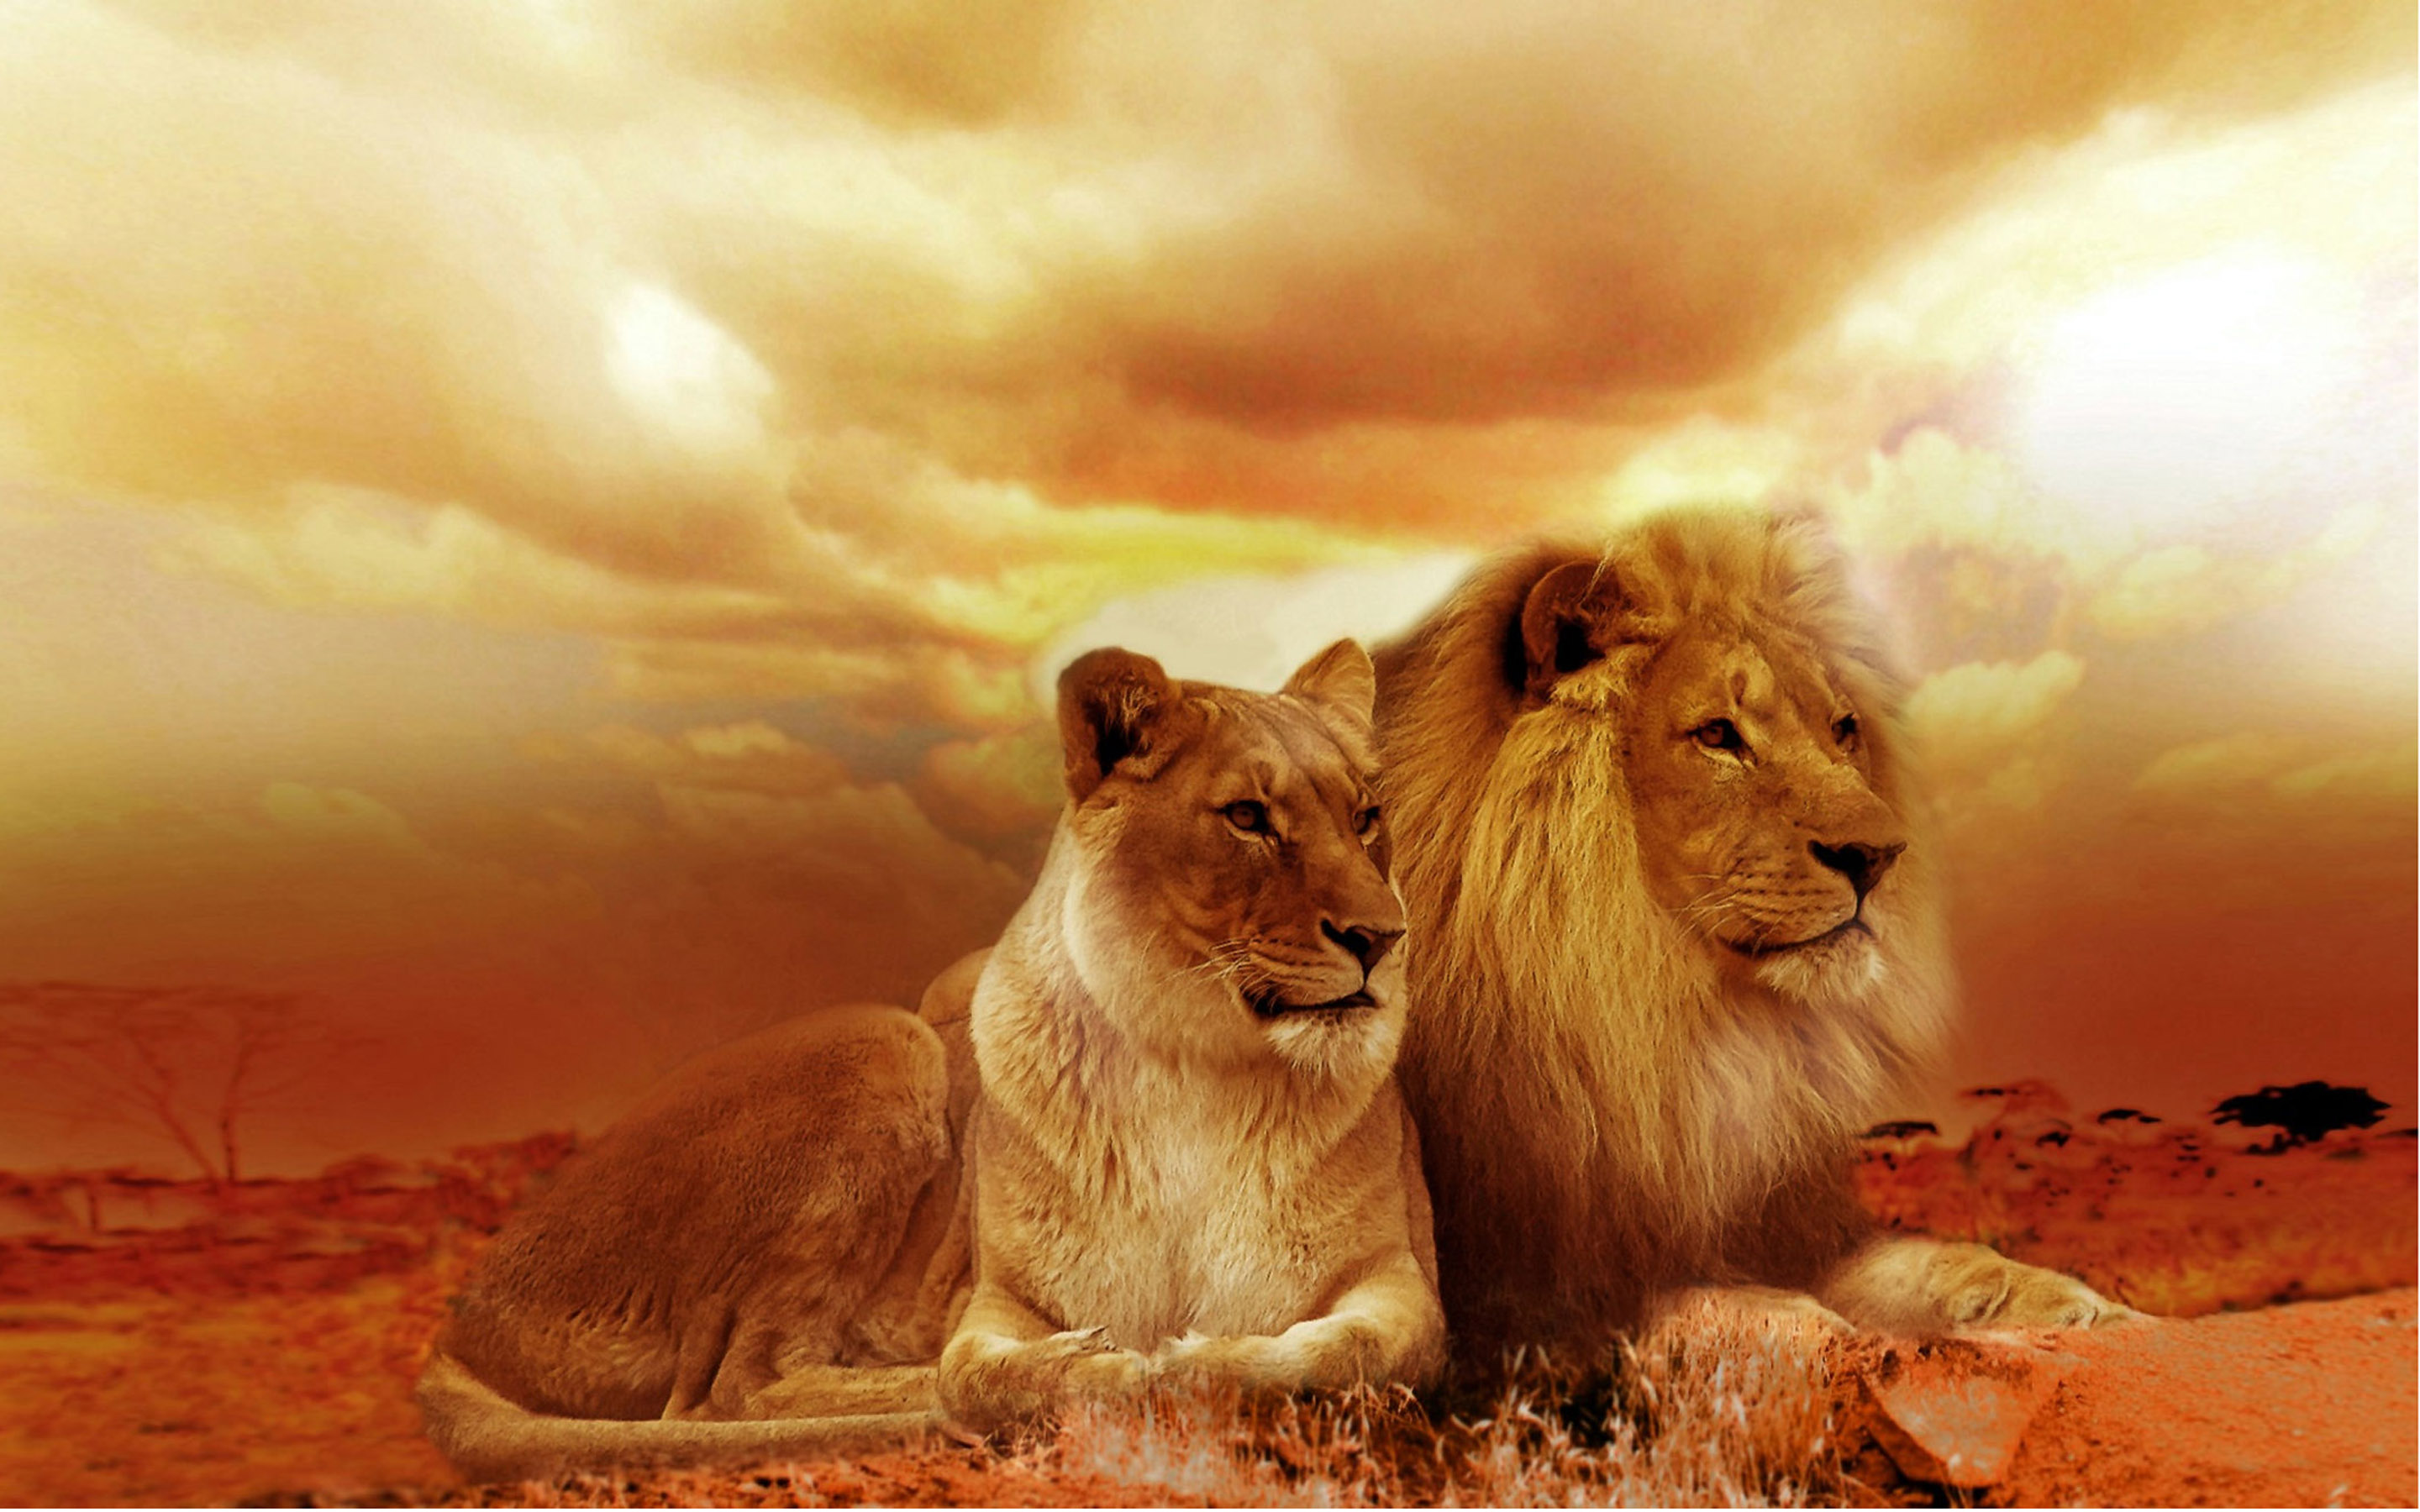 Beautiful Male and Female Lion in Africa by Christine Sponchia HD Wallpaper